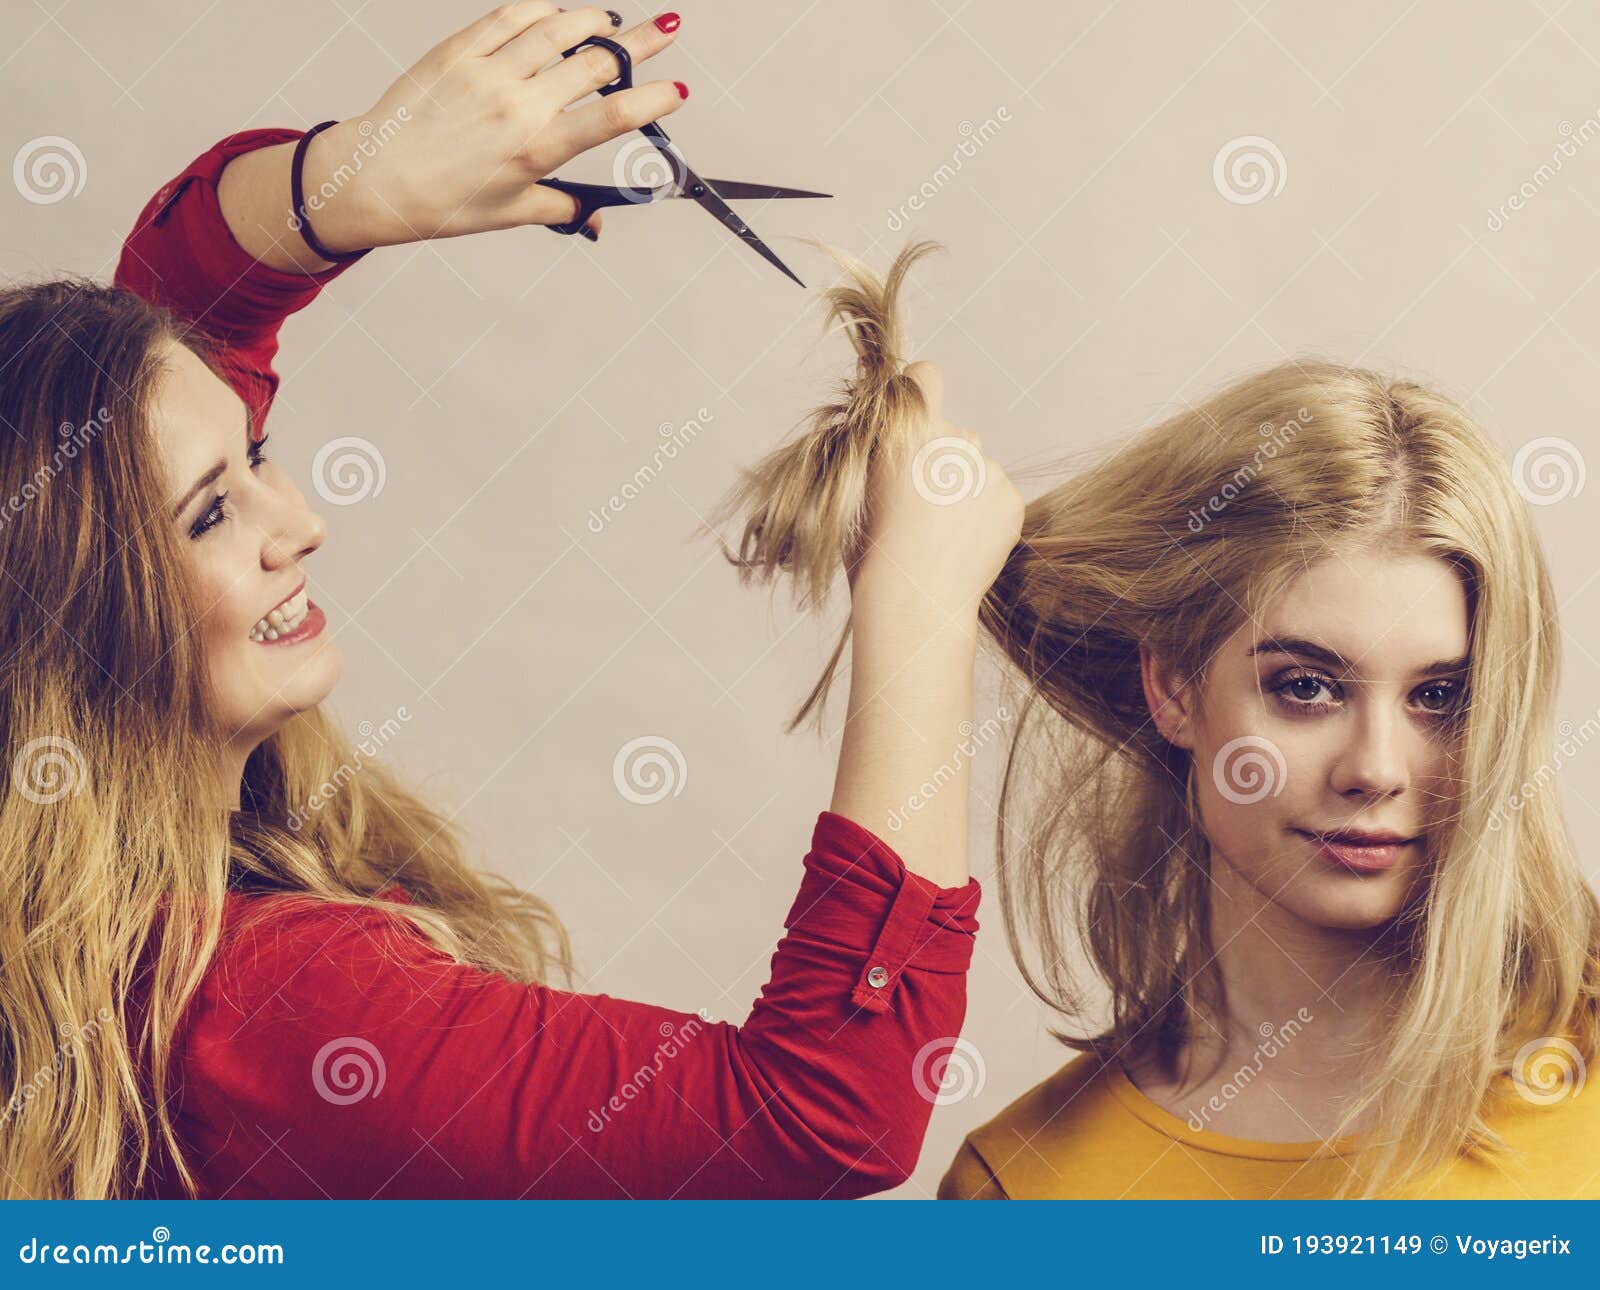 Woman with Scissors Ready To Hair Cutting Stock Image - Image of girl,  styling: 193921149